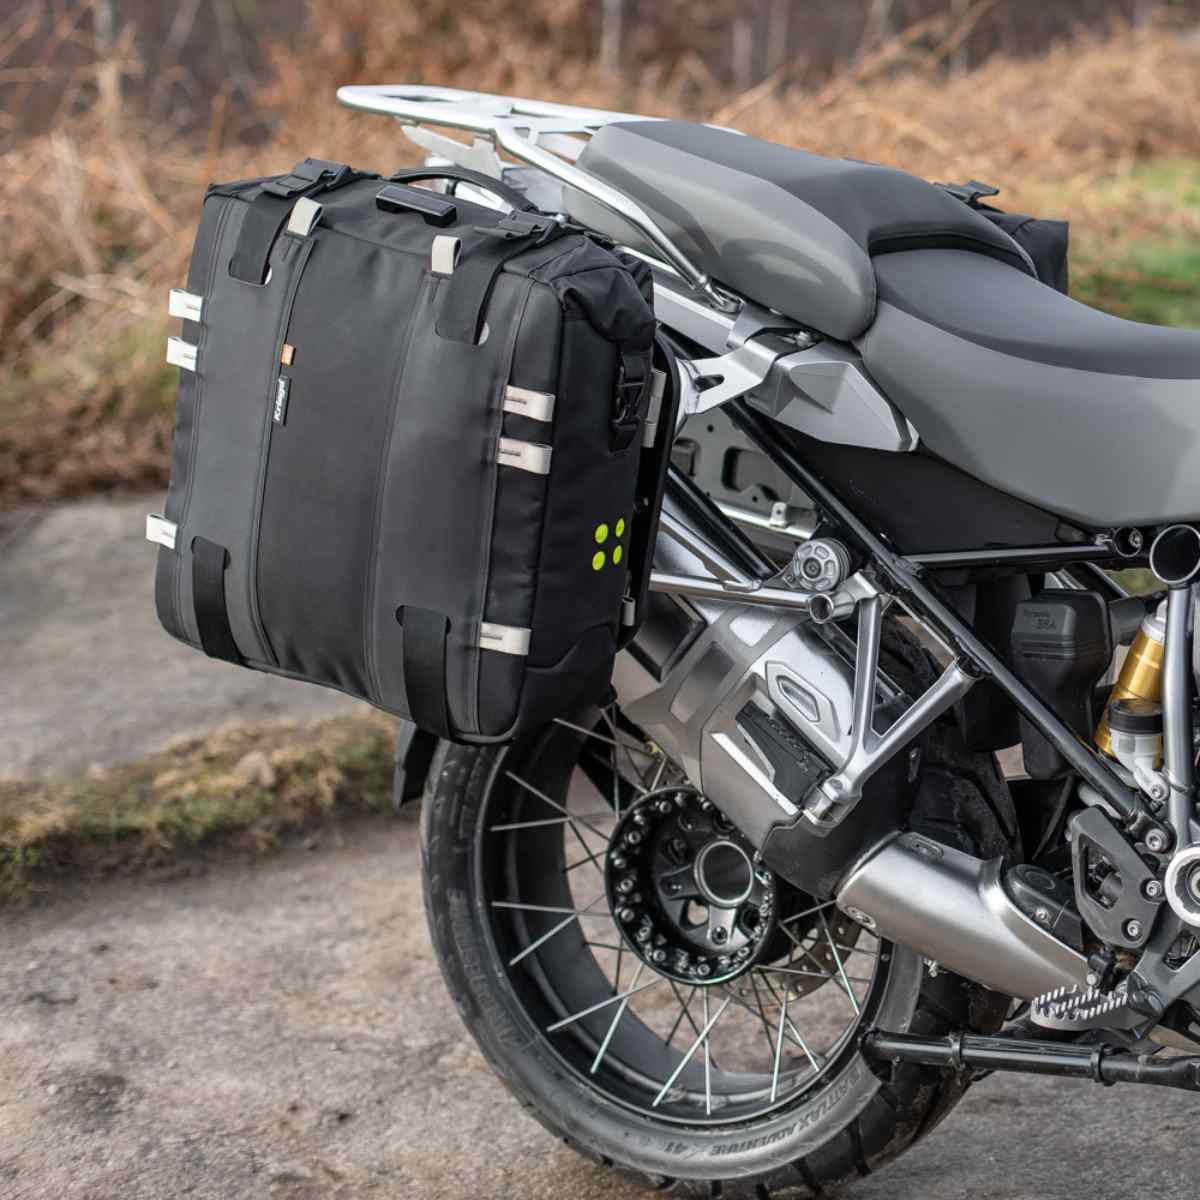 Kriega Overlander-S OS-22 Soft Pannier WP: Serious luggage for serious adventures